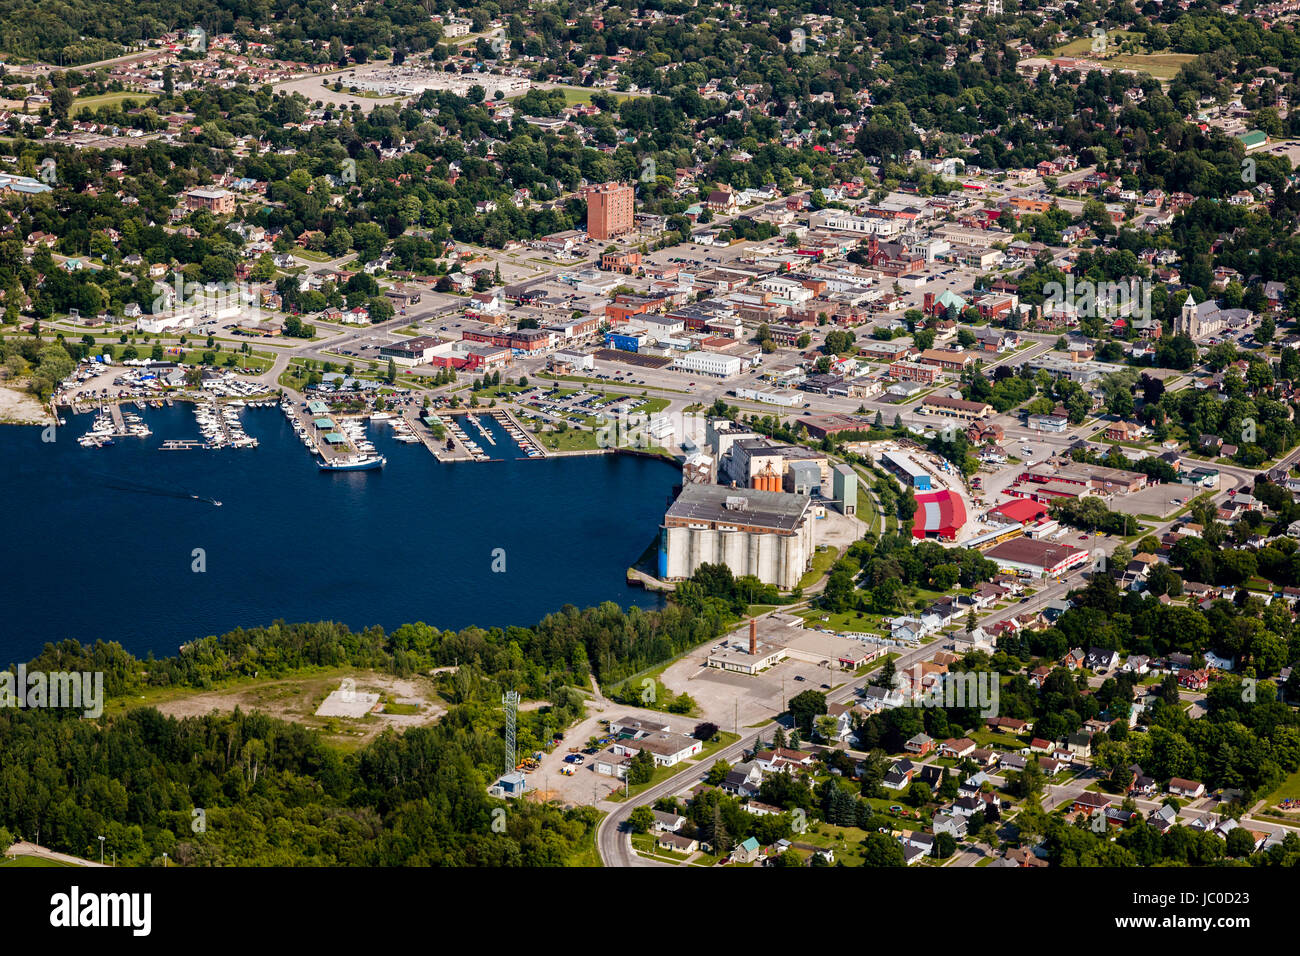 An Aerial view of Midland Ontario downtown and harbour on Georgian Bay. Stock Photo